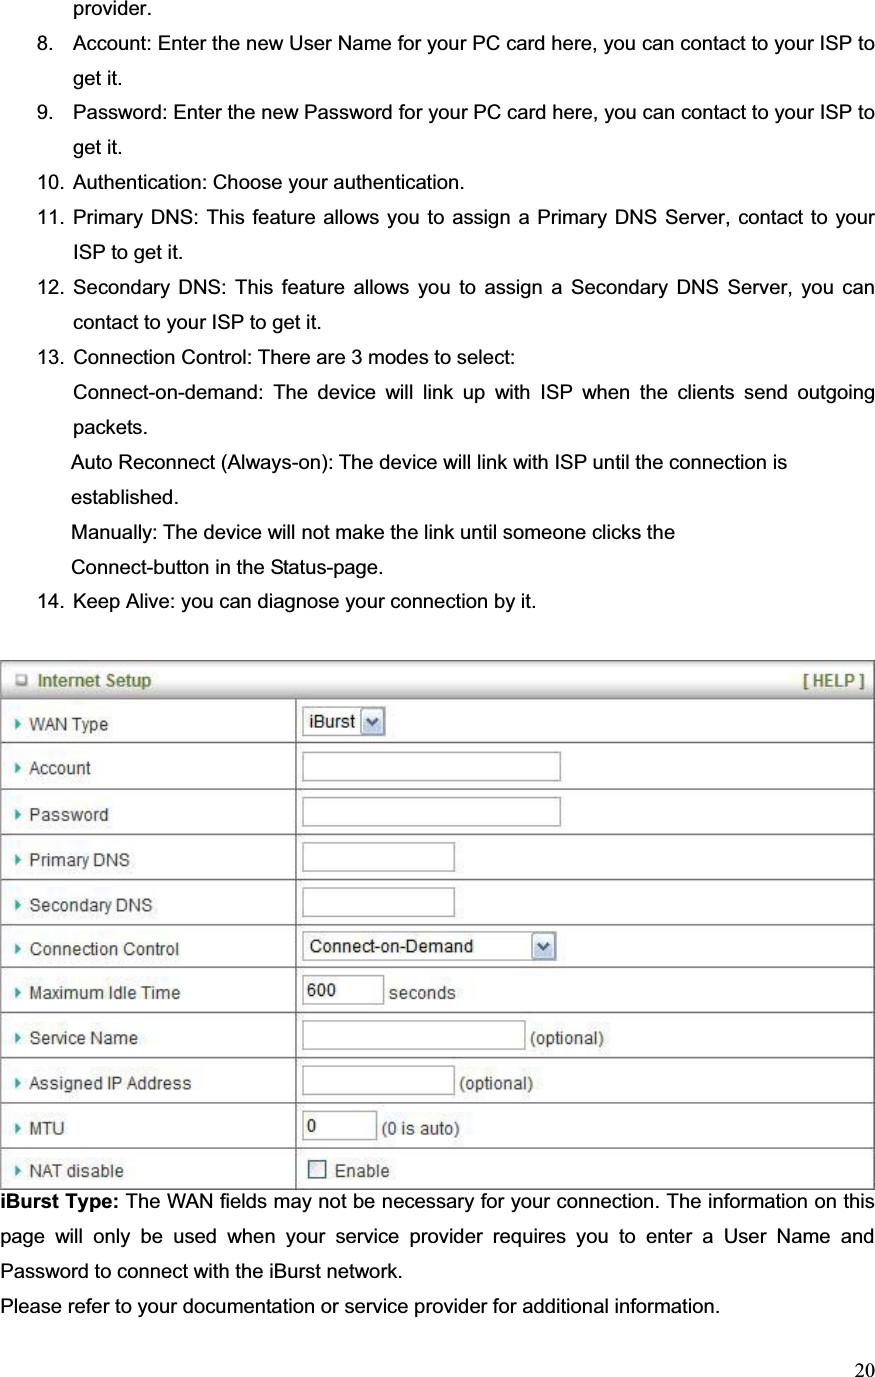 20provider. 8.  Account: Enter the new User Name for your PC card here, you can contact to your ISP to get it. 9.  Password: Enter the new Password for your PC card here, you can contact to your ISP to get it. 10.  Authentication: Choose your authentication.   11. Primary DNS: This feature allows you to assign a Primary DNS Server, contact to your ISP to get it. 12. Secondary DNS: This feature allows you to assign a Secondary DNS Server, you can contact to your ISP to get it. 13. Connection Control: There are 3 modes to select:   Connect-on-demand: The device will link up with ISP when the clients send outgoing packets.                Auto Reconnect (Always-on): The device will link with ISP until the connection is  ʳʳ       established.   Manually: The device will not make the link until someone clicks the  ʳ       Connect-button in the Status-page.  14.  Keep Alive: you can diagnose your connection by it. iBurst Type: The WAN fields may not be necessary for your connection. The information on this page will only be used when your service provider requires you to enter a User Name and Password to connect with the iBurst network. Please refer to your documentation or service provider for additional information.